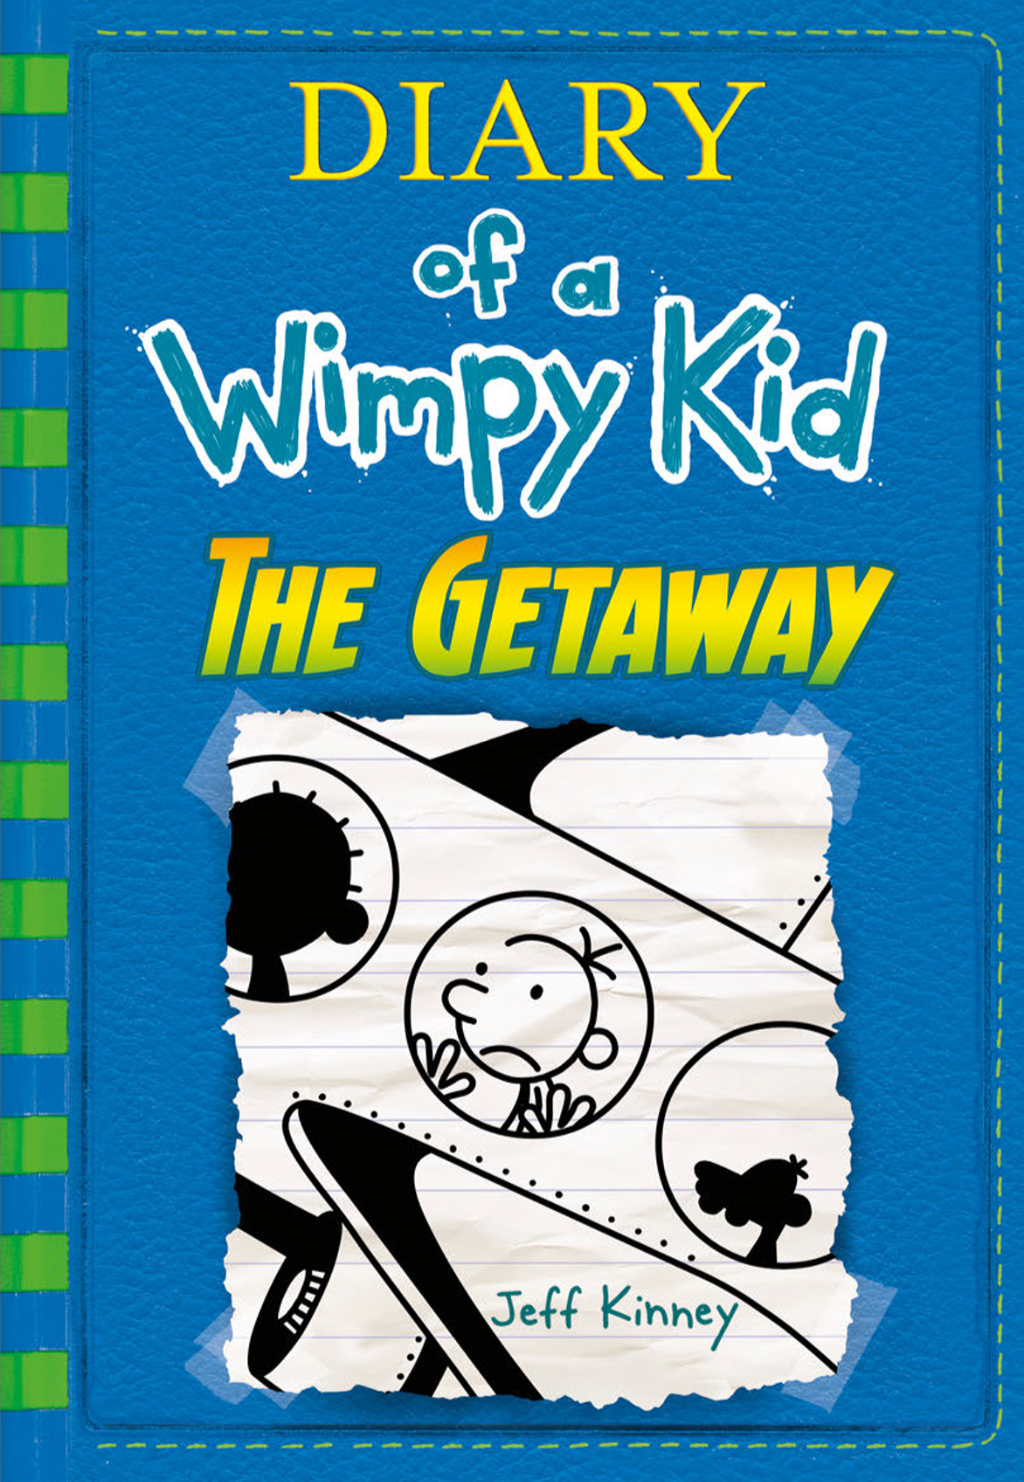 Buy Diary of a Wimpy Kid: Rodrick Rules - Microsoft Store